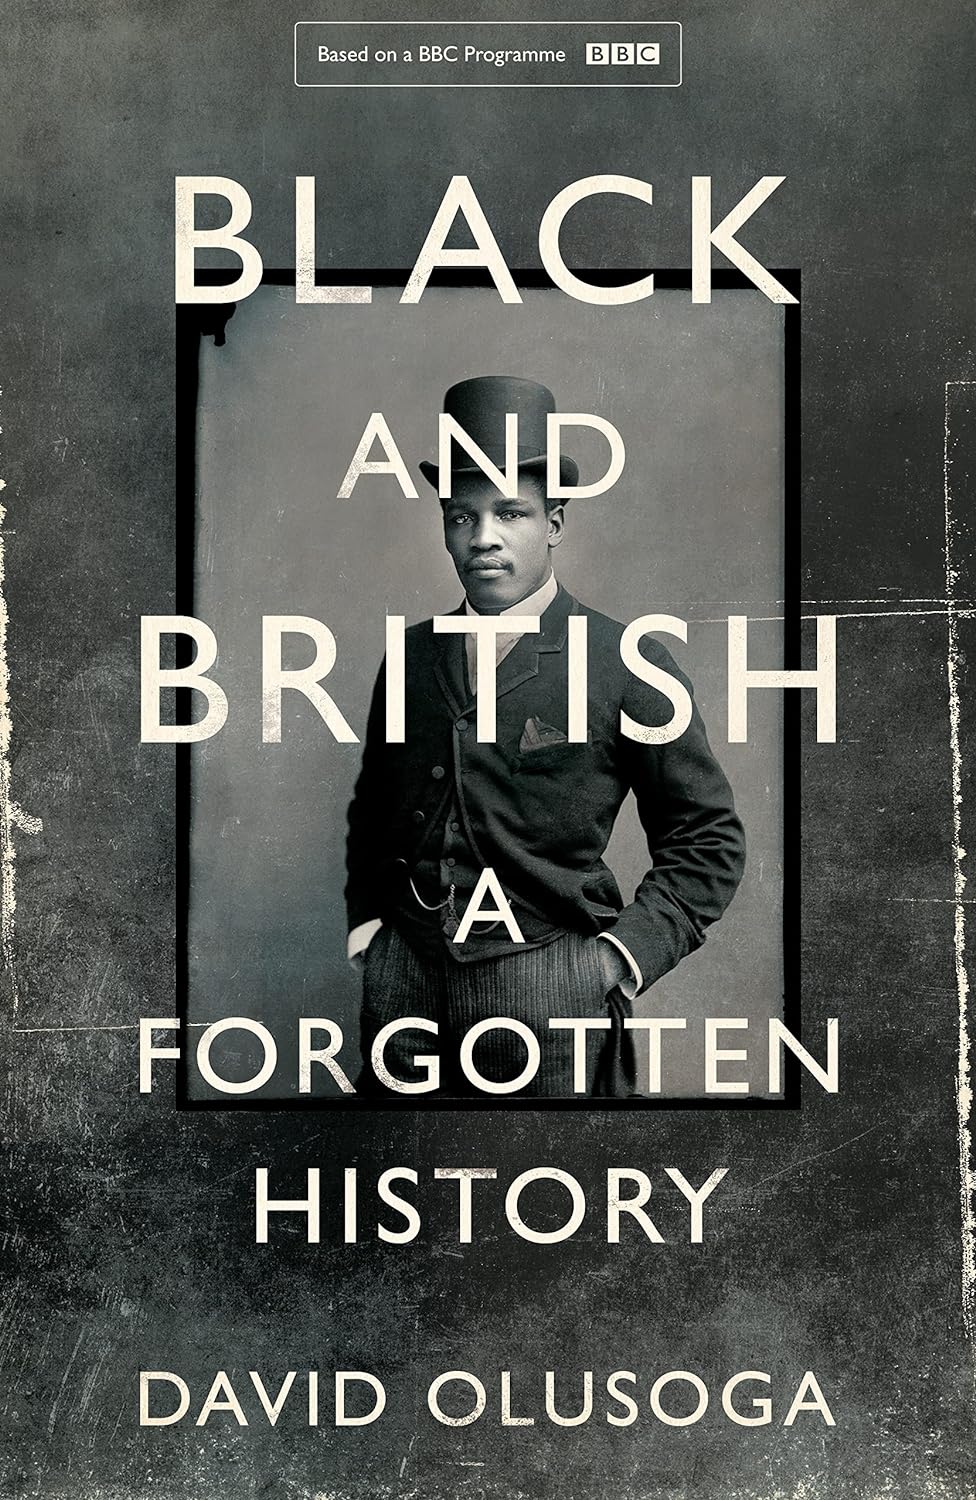 Black and British An Overlooked History by David Olusoga